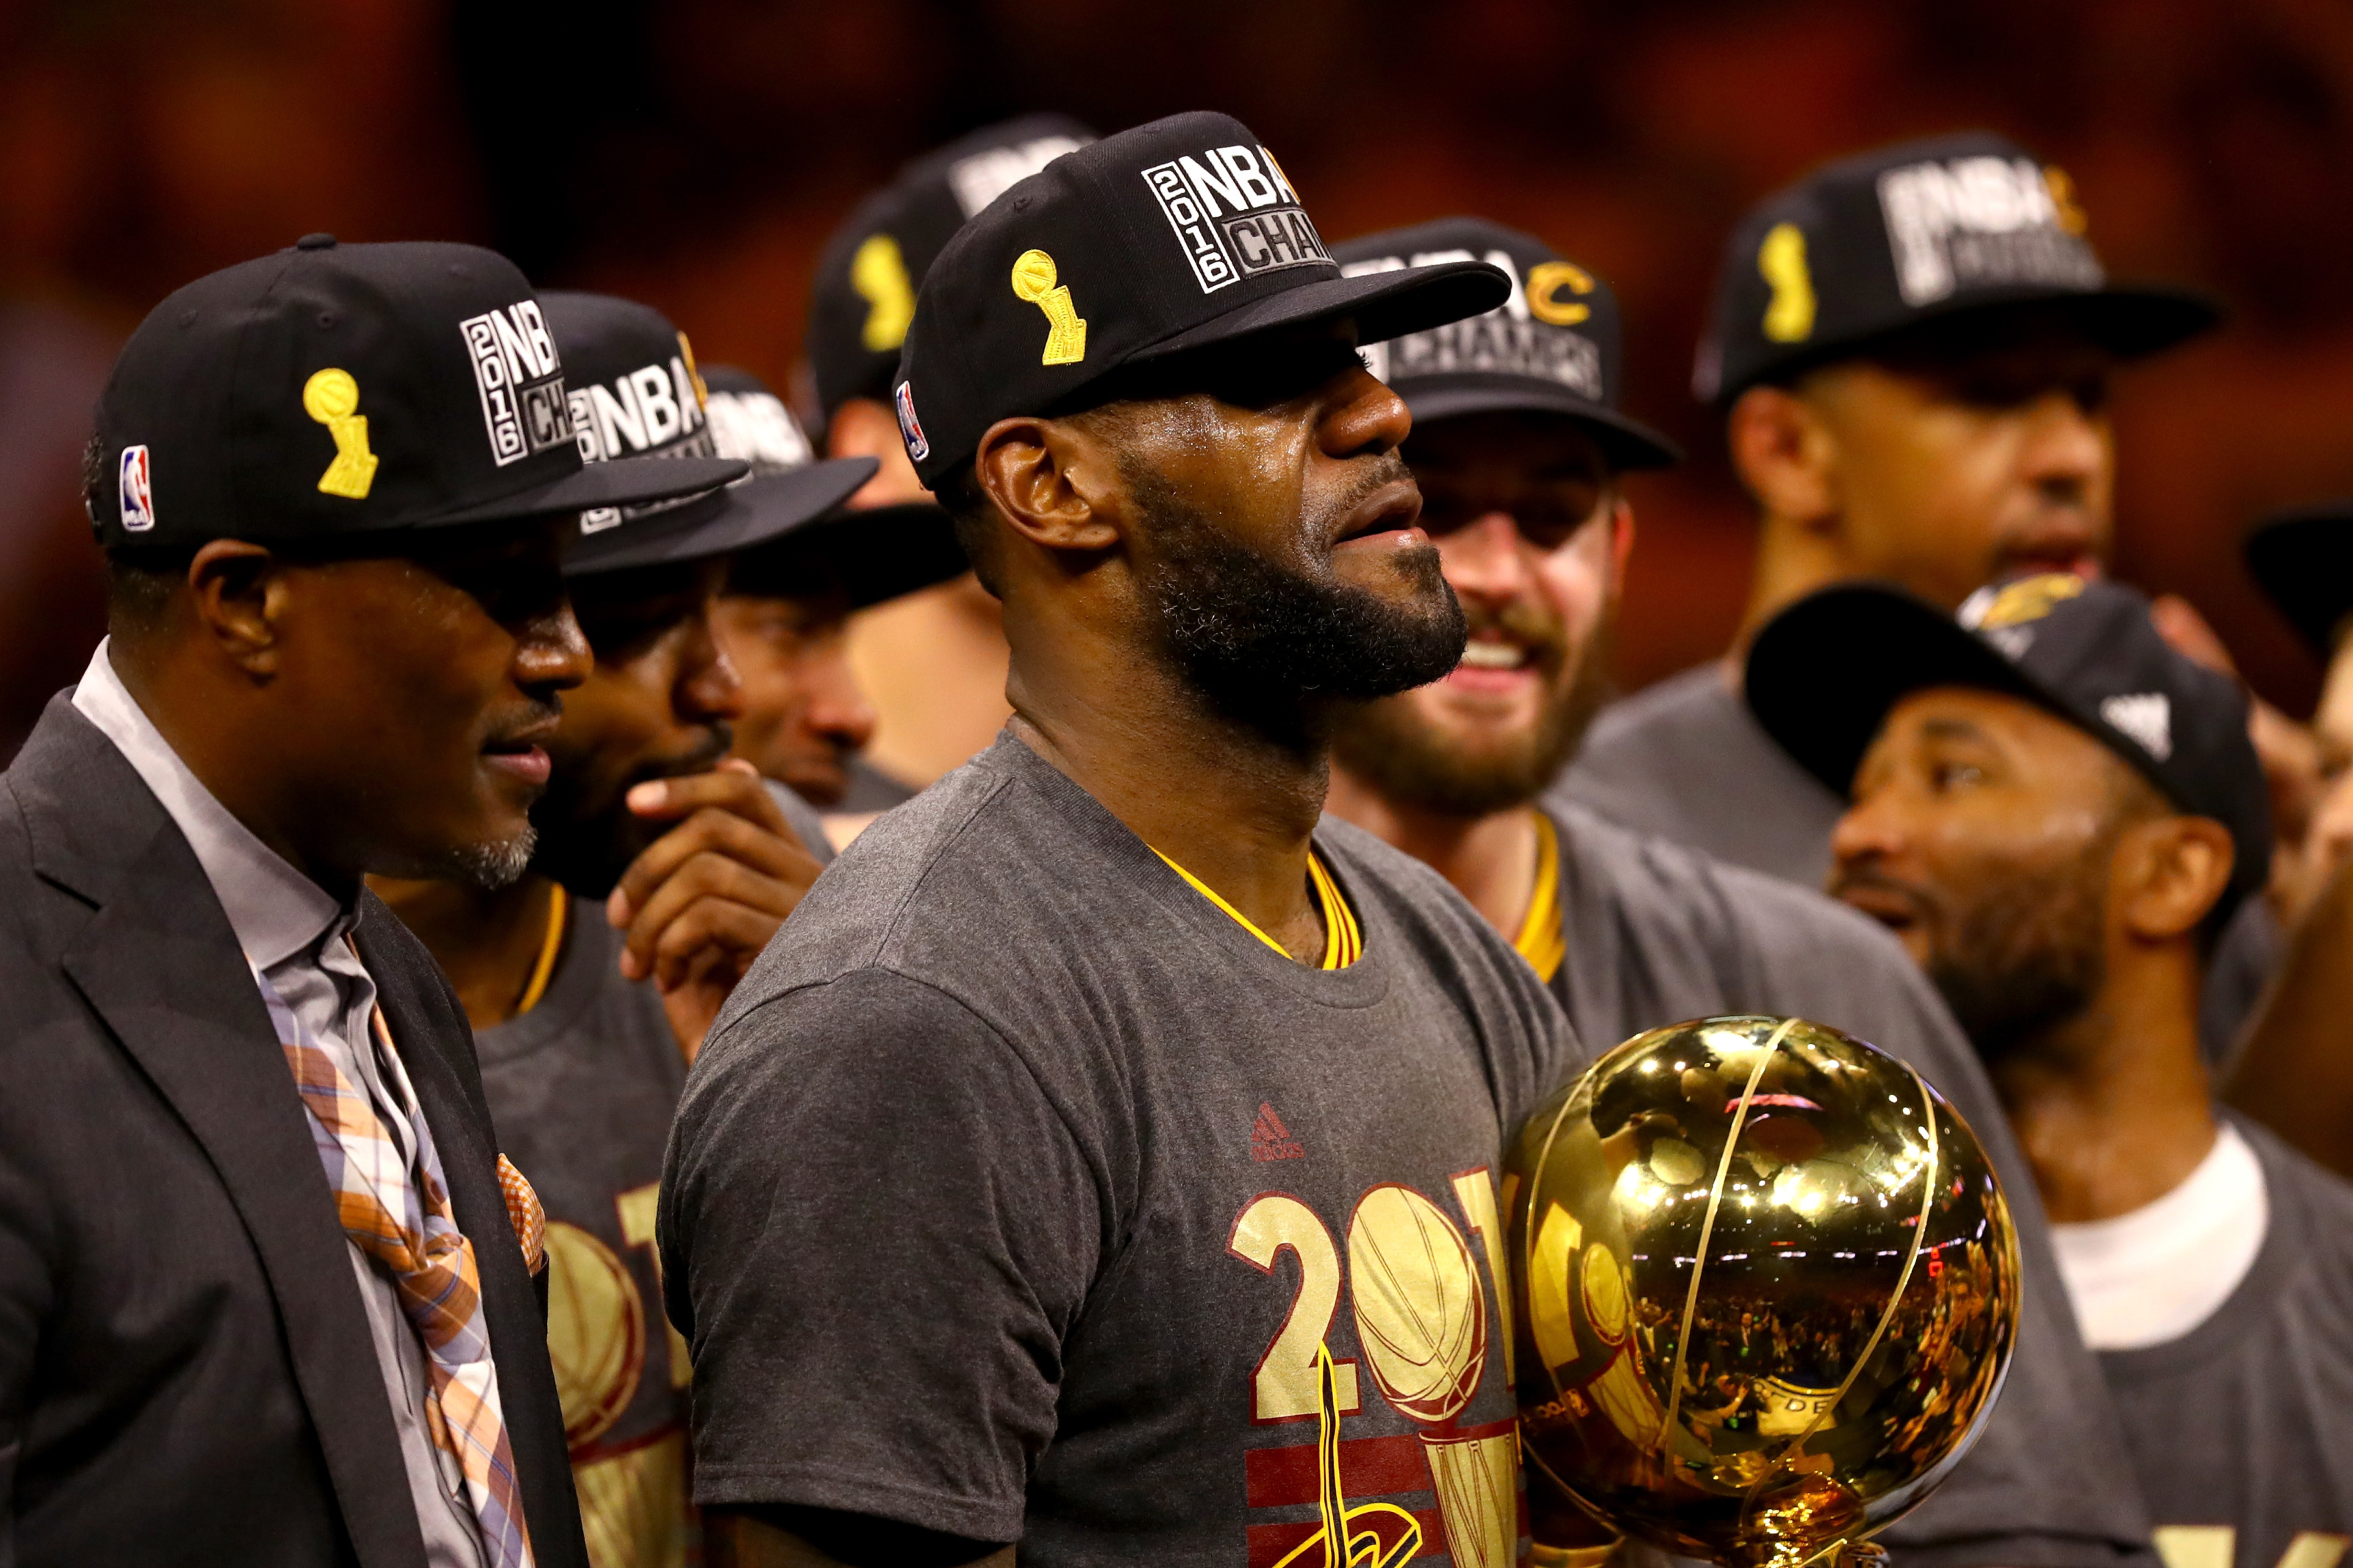 Timeline of How the CLEVELAND CAVALIERS Lost LEBRON JAMES